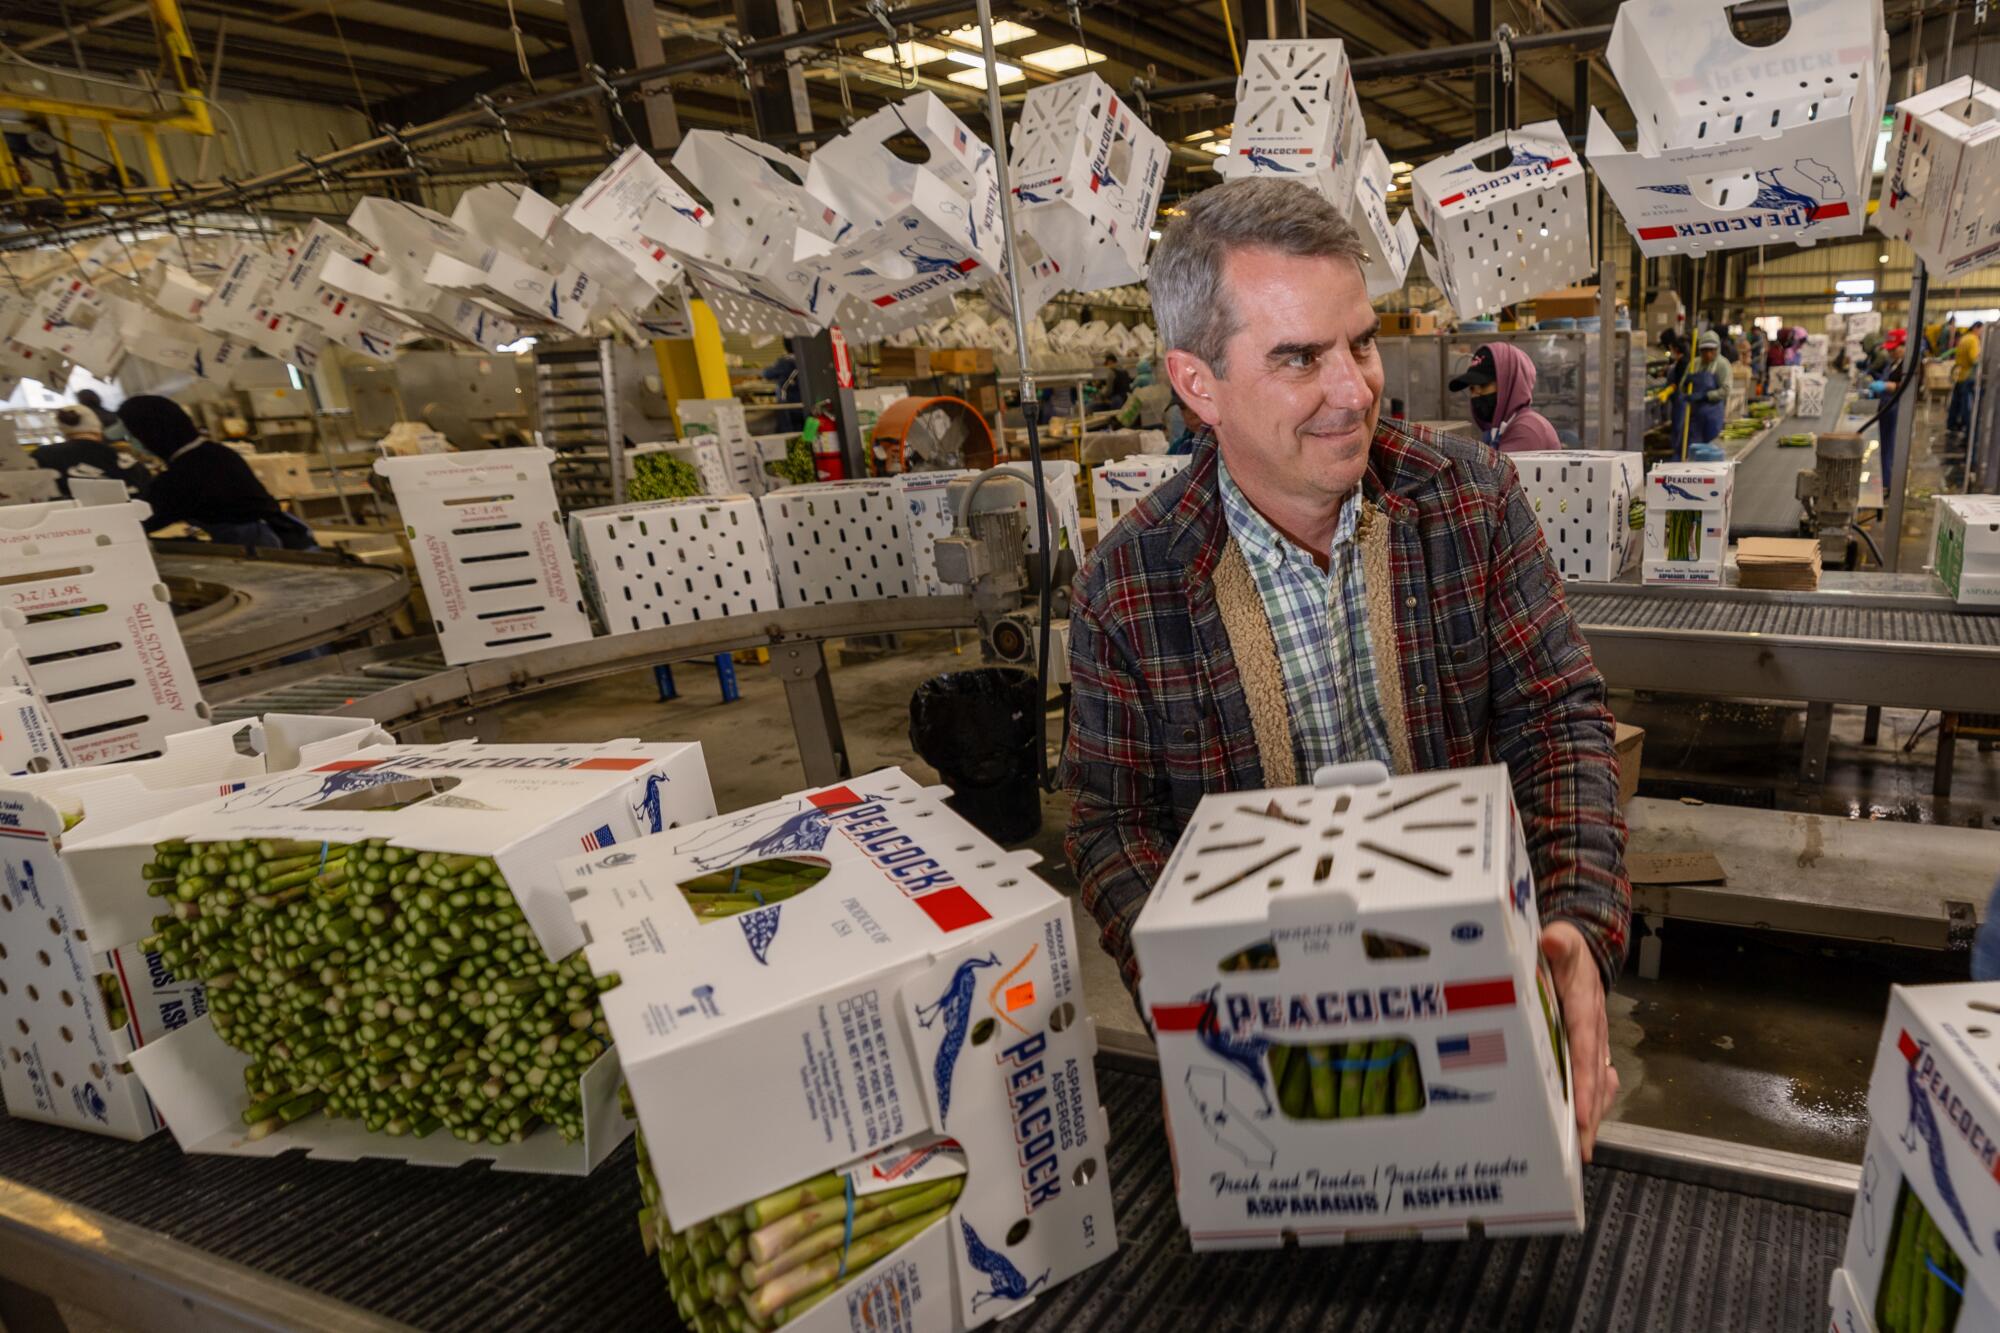 A man carries a box of asparagus off a conveyor belt at a packing house.